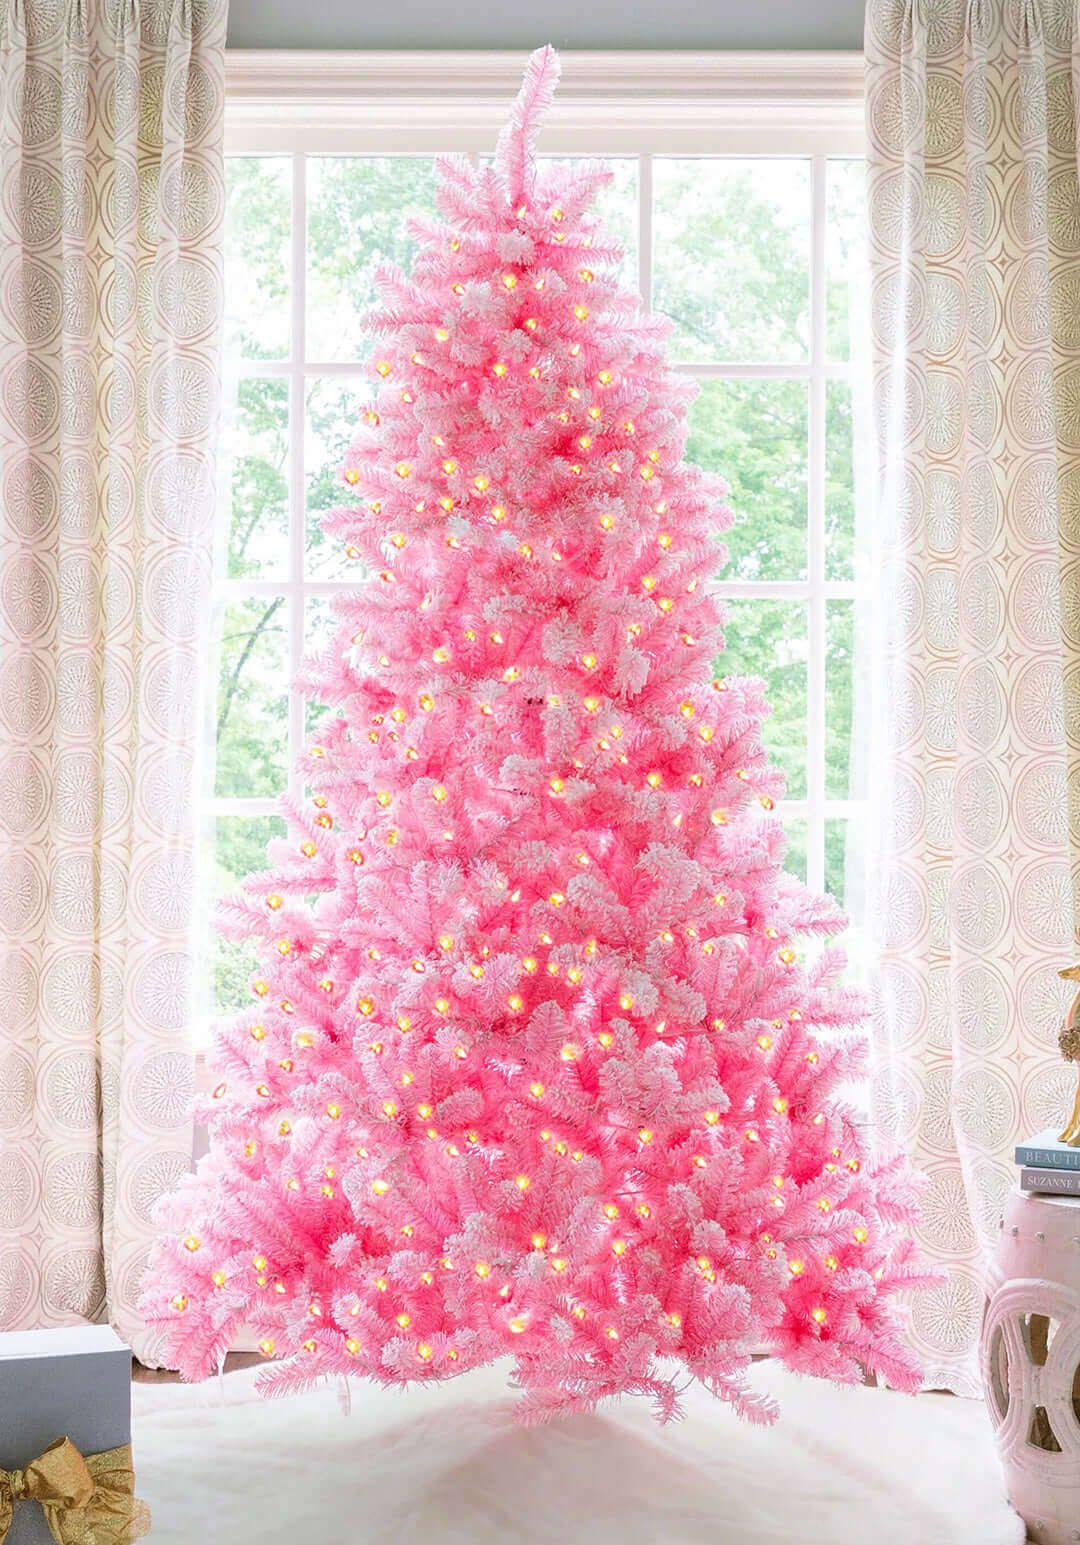 7.5' Duchess Pink Flock Artificial Christmas Tree with 600 Warm White LED Lights | King of Christmas